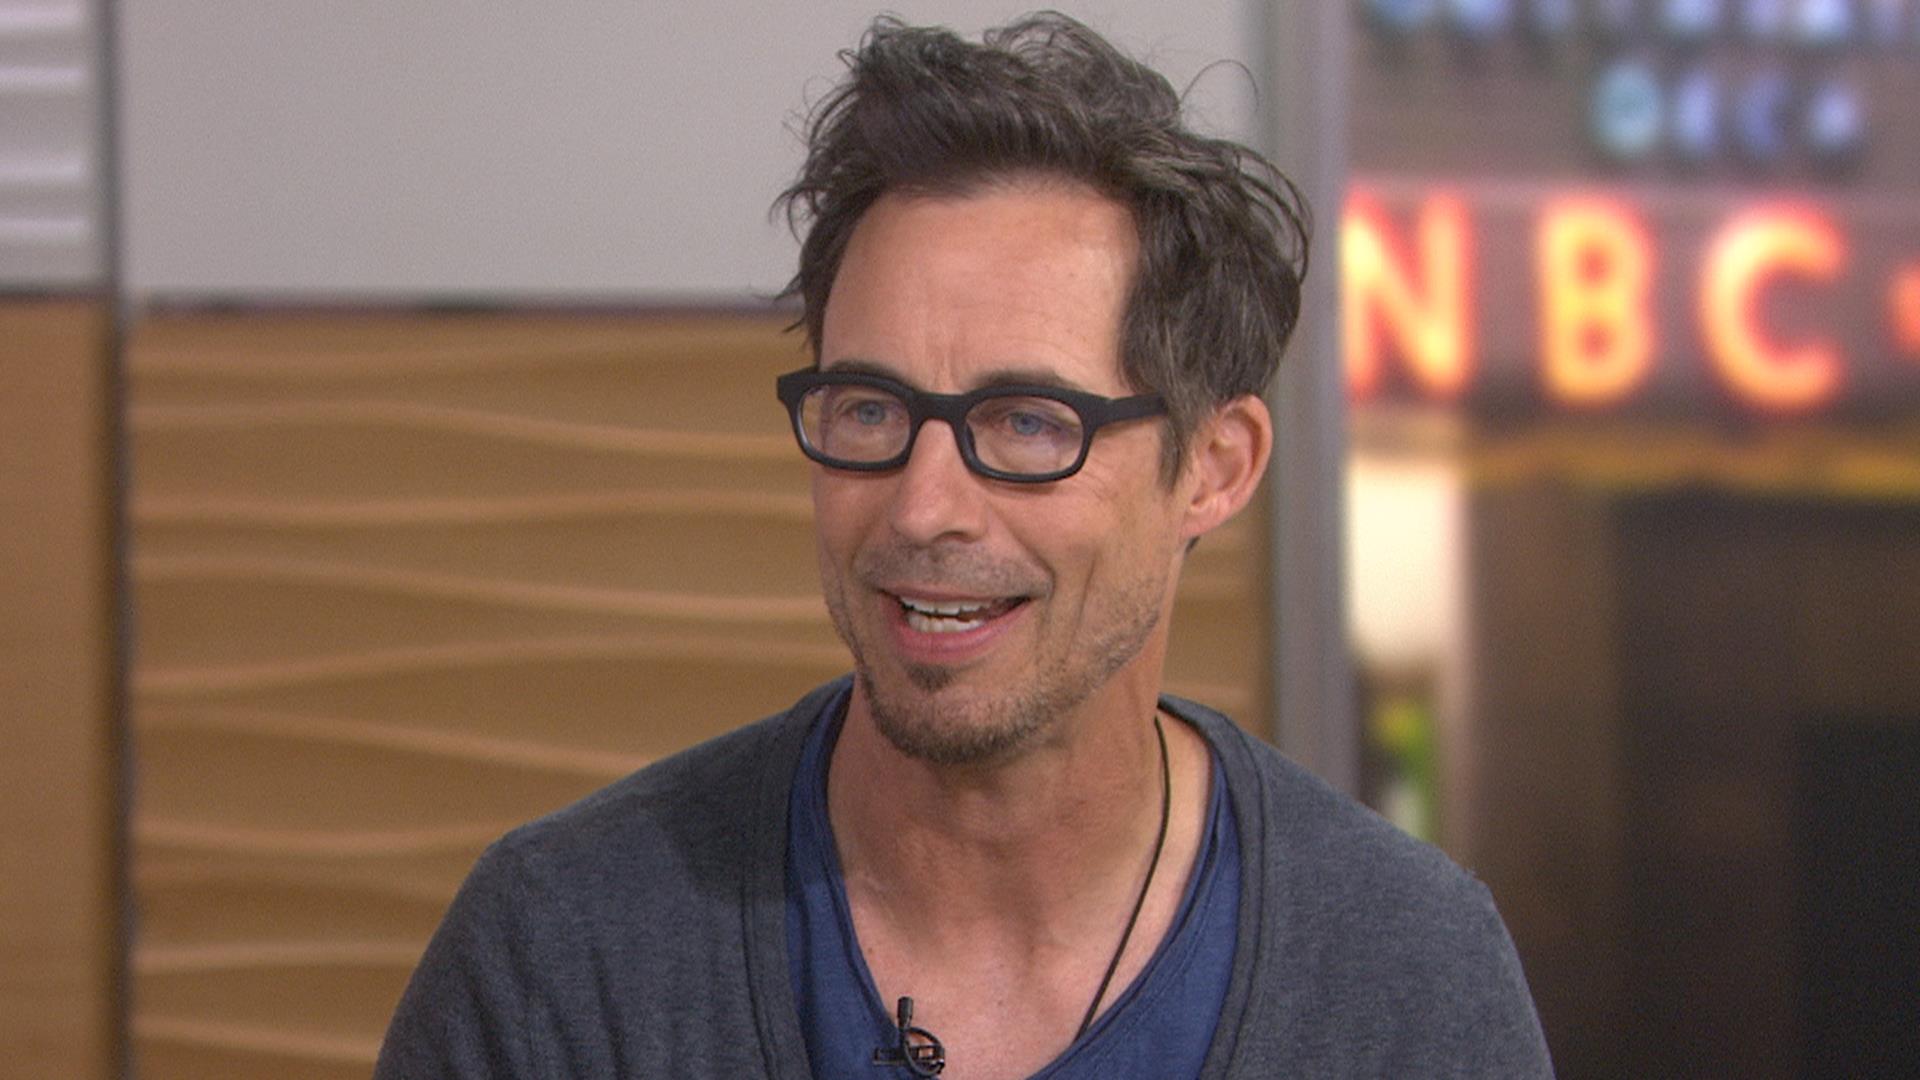 Tom Cavanagh of The Flash My superpower would be eating pizza